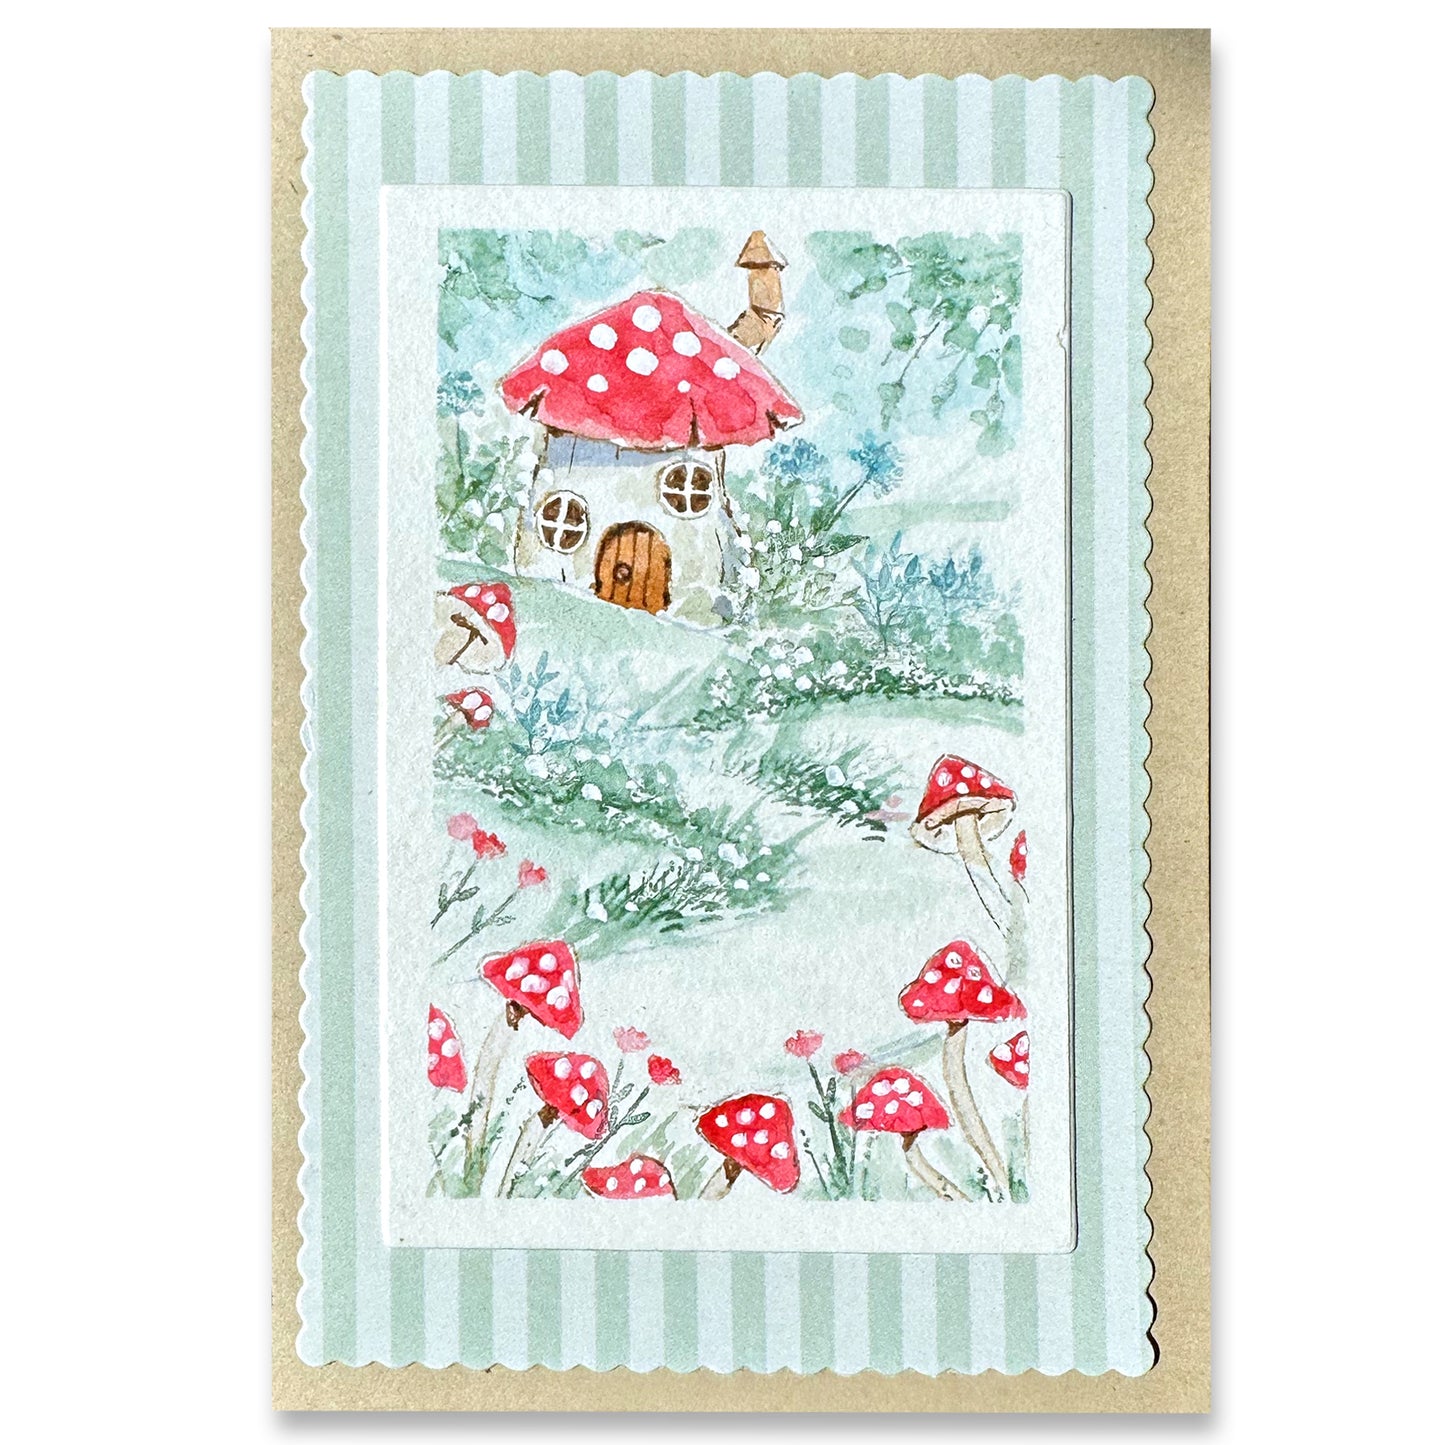 Art Impressions Whimsical Mushrooms Clear Stamps - 5788